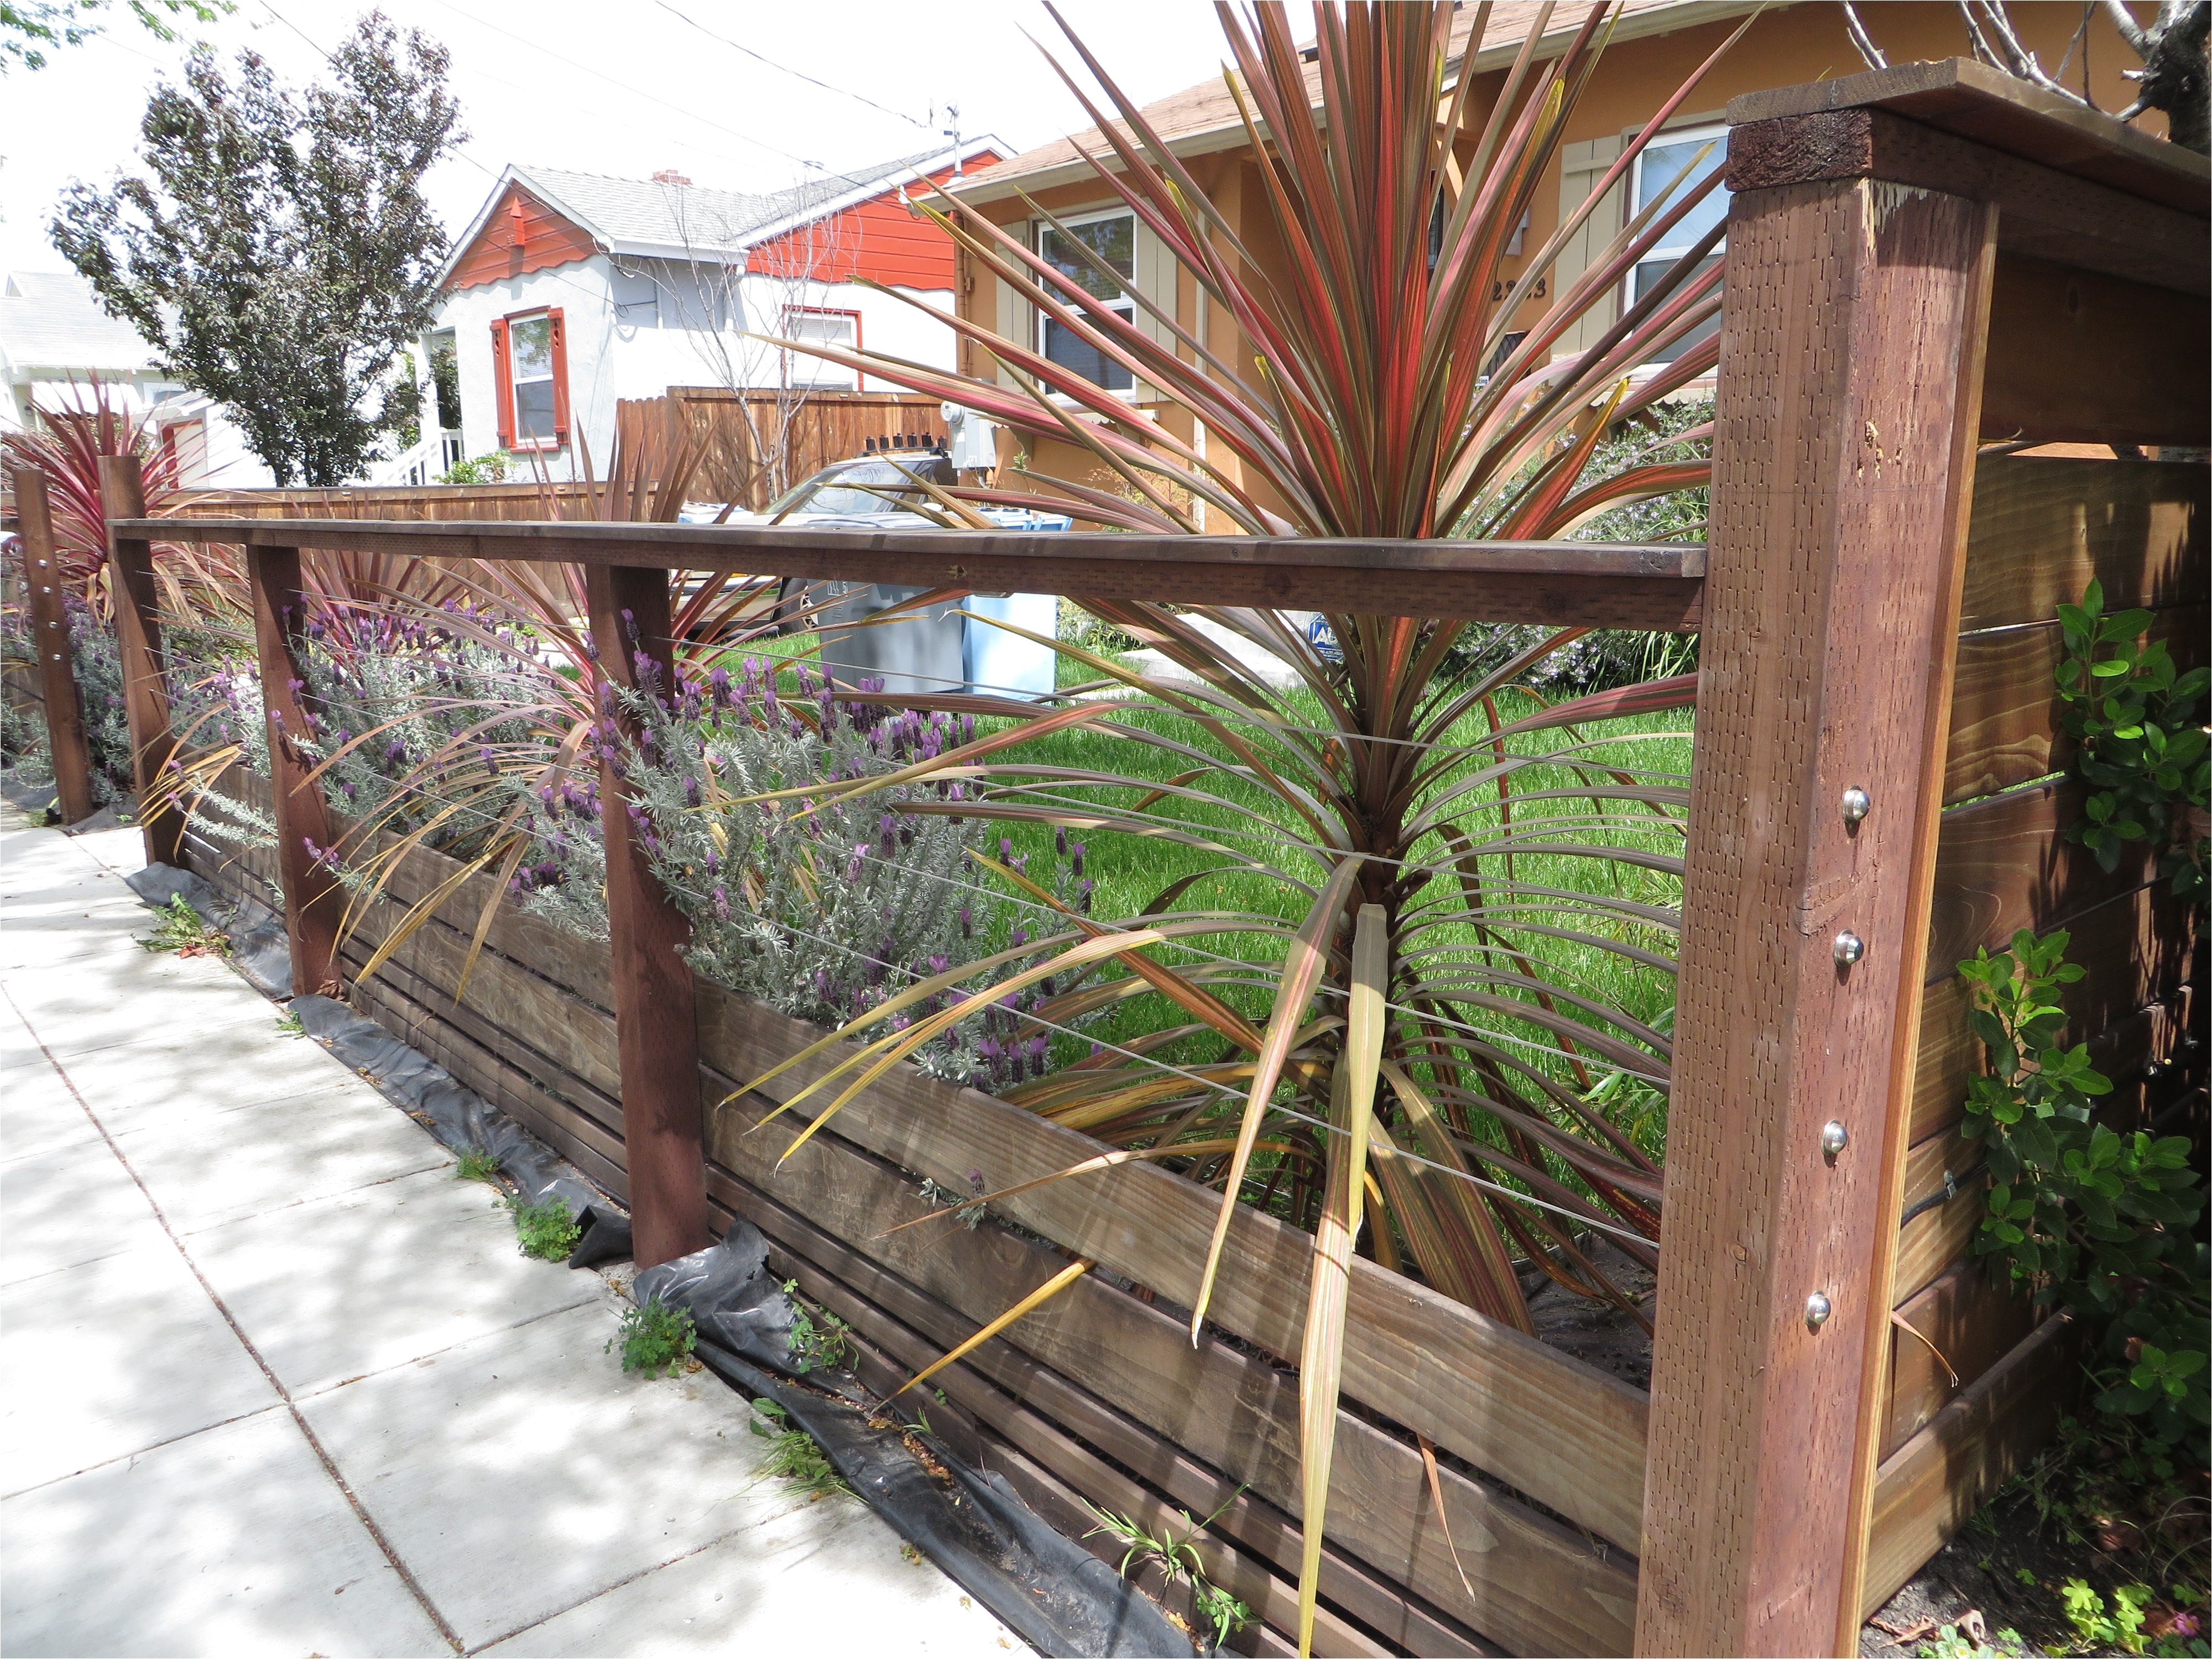 modern low fence with wood at bottom horizontal wires and nice metal details